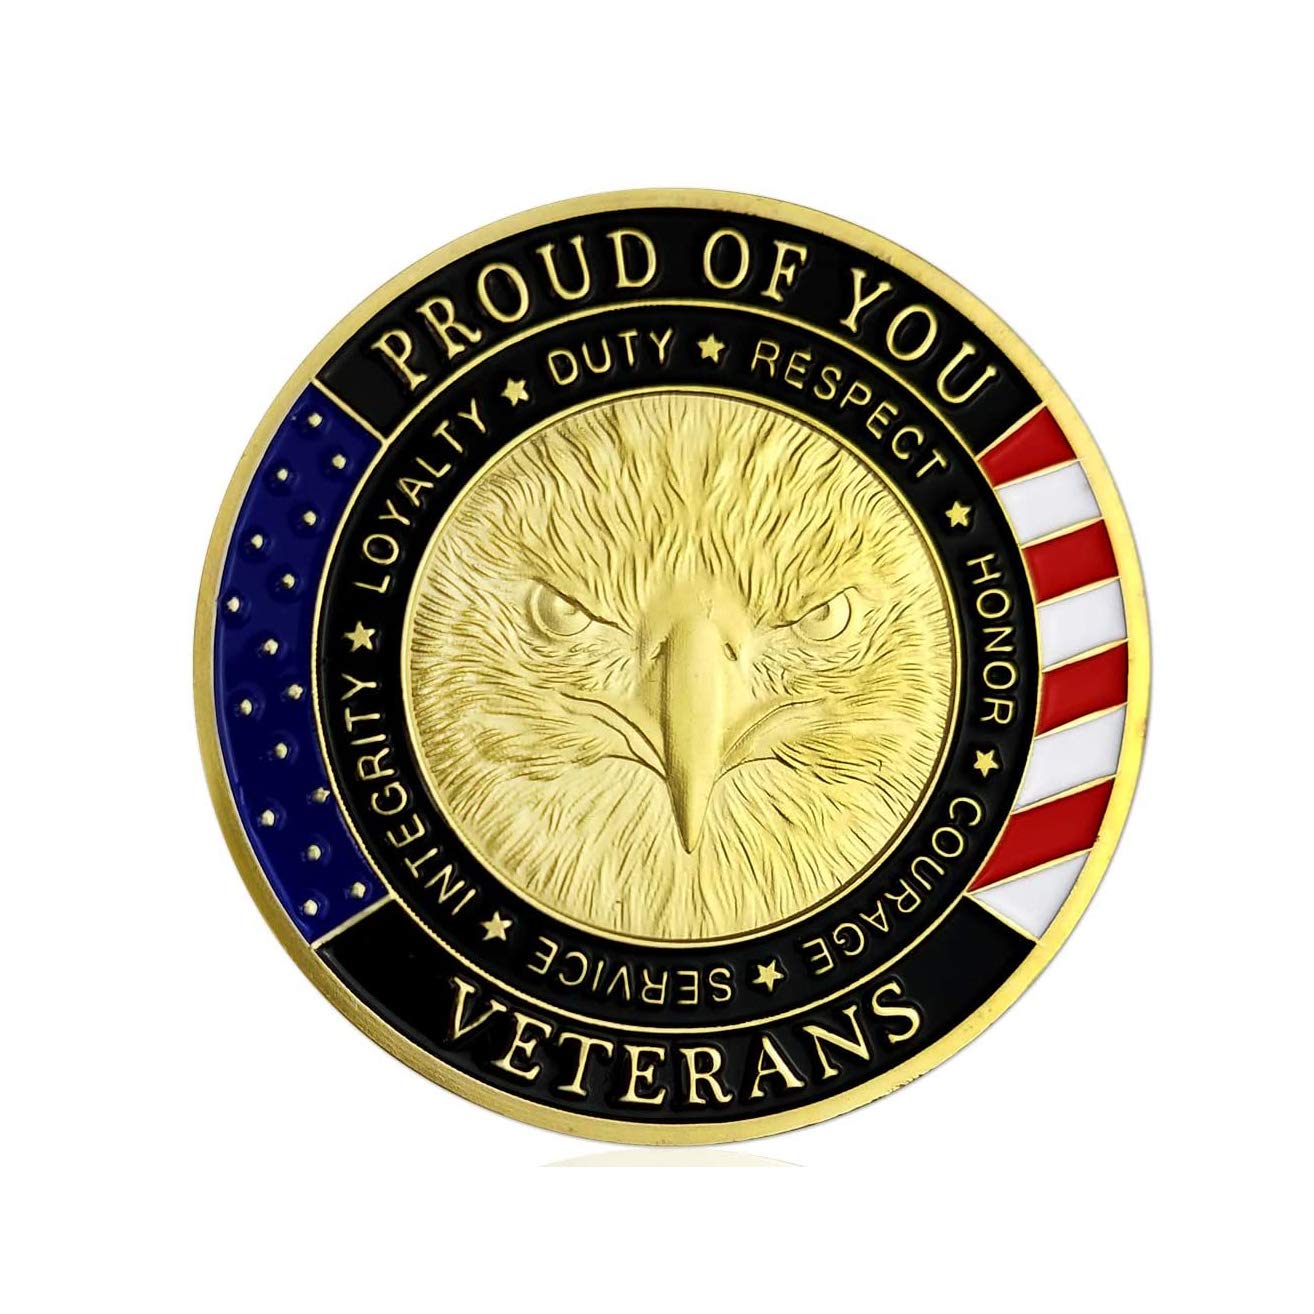 Thank You for Your Service Military Veterans Challenge Coin Appreciation Gift